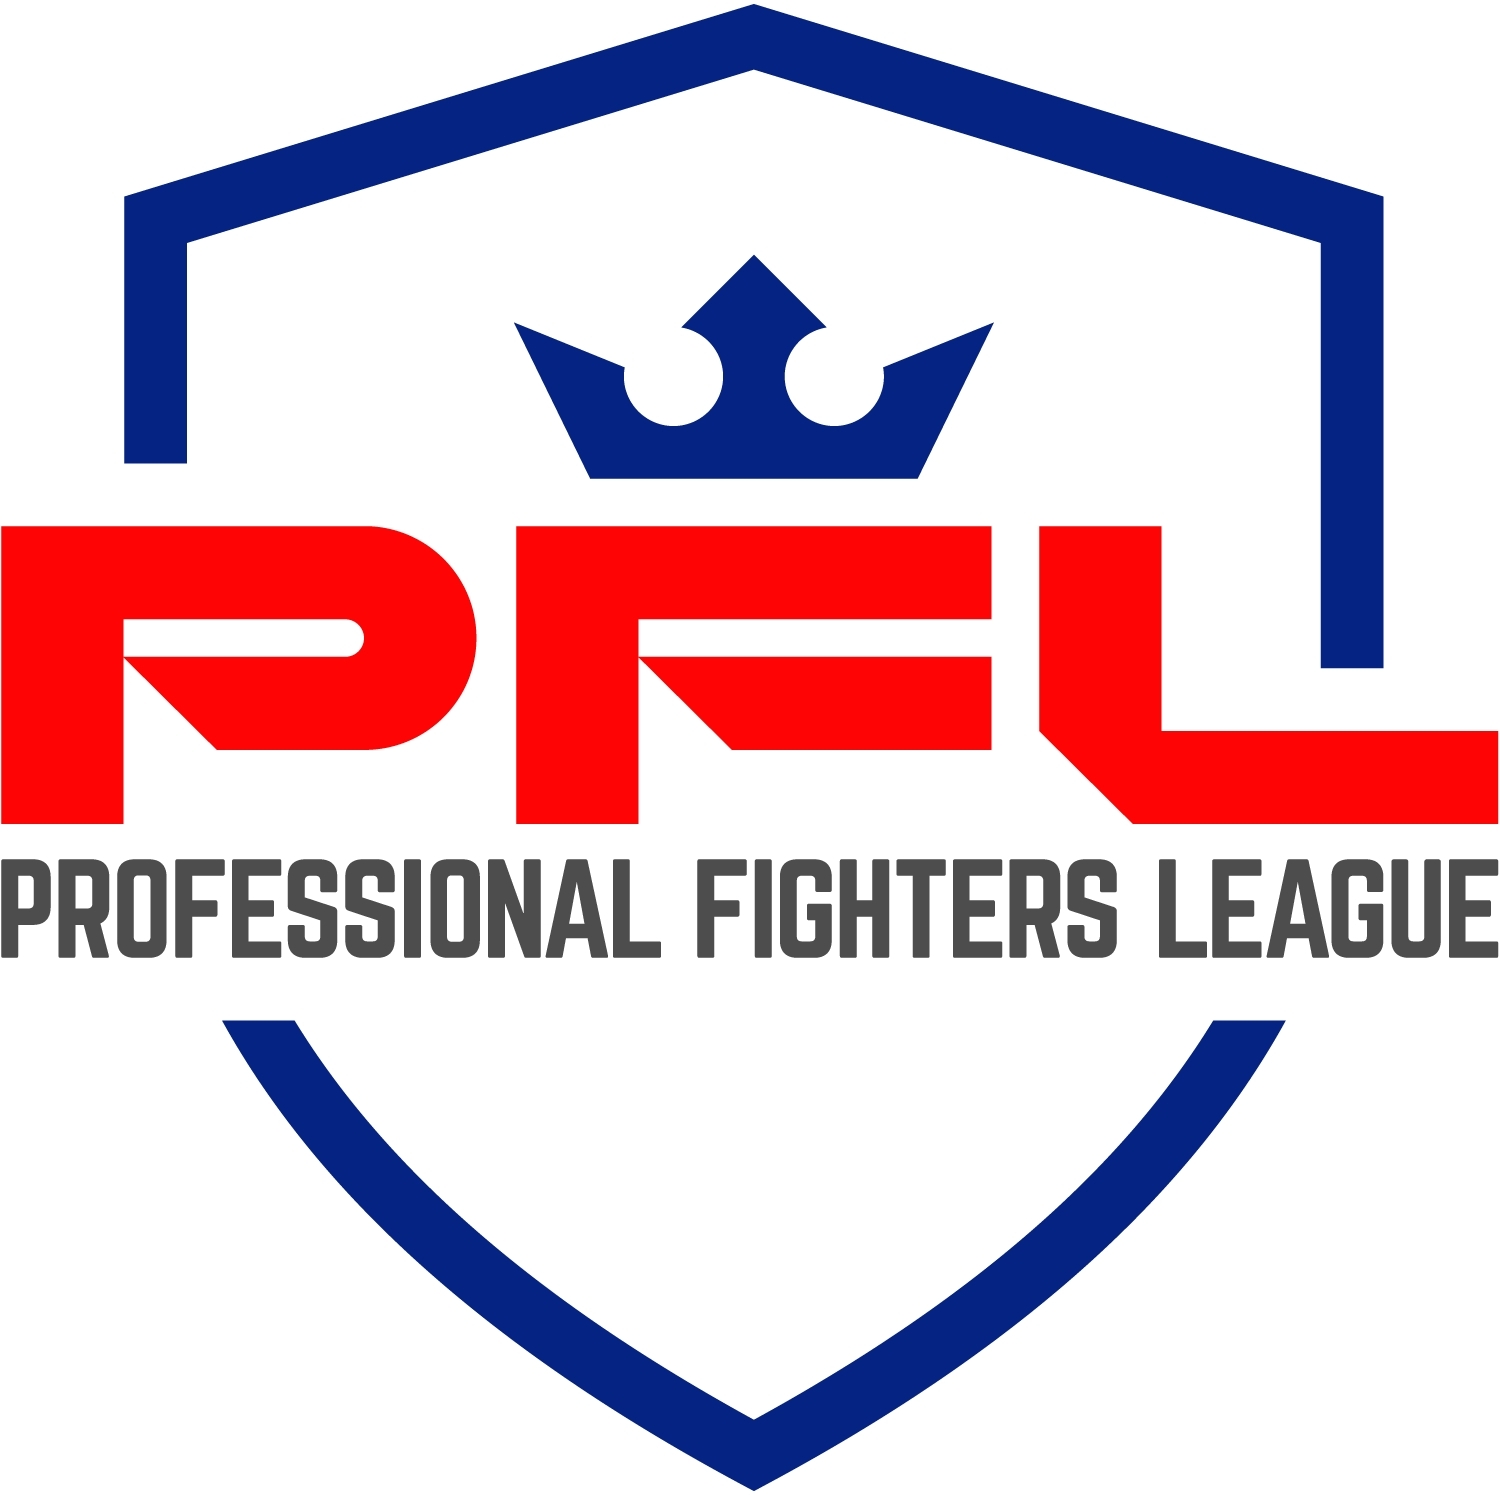 Professional Fighters League (PFL) Announces Full Fight Card and Ticket  Sales For PFL3 Live at the Charles E. Smith Center in Washington, D.C. on  July 5